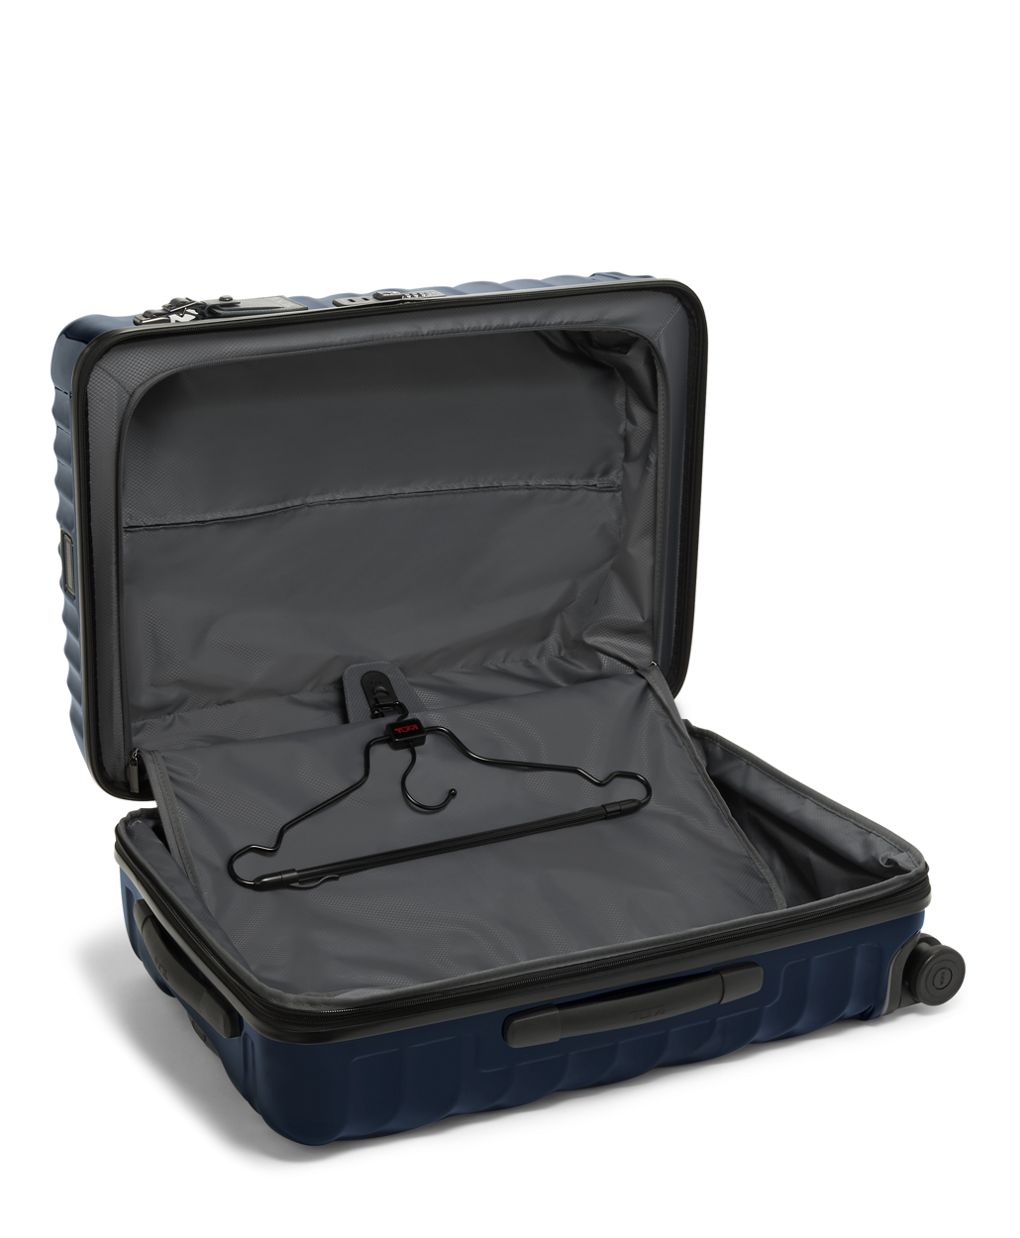 Mr. Quickie on X: Travel without hassle with Mr. Quickie Luggage repair.  We replace handle, wheels, zipper, and other accessories #GoMrQuickie  #LuggageRepair  / X